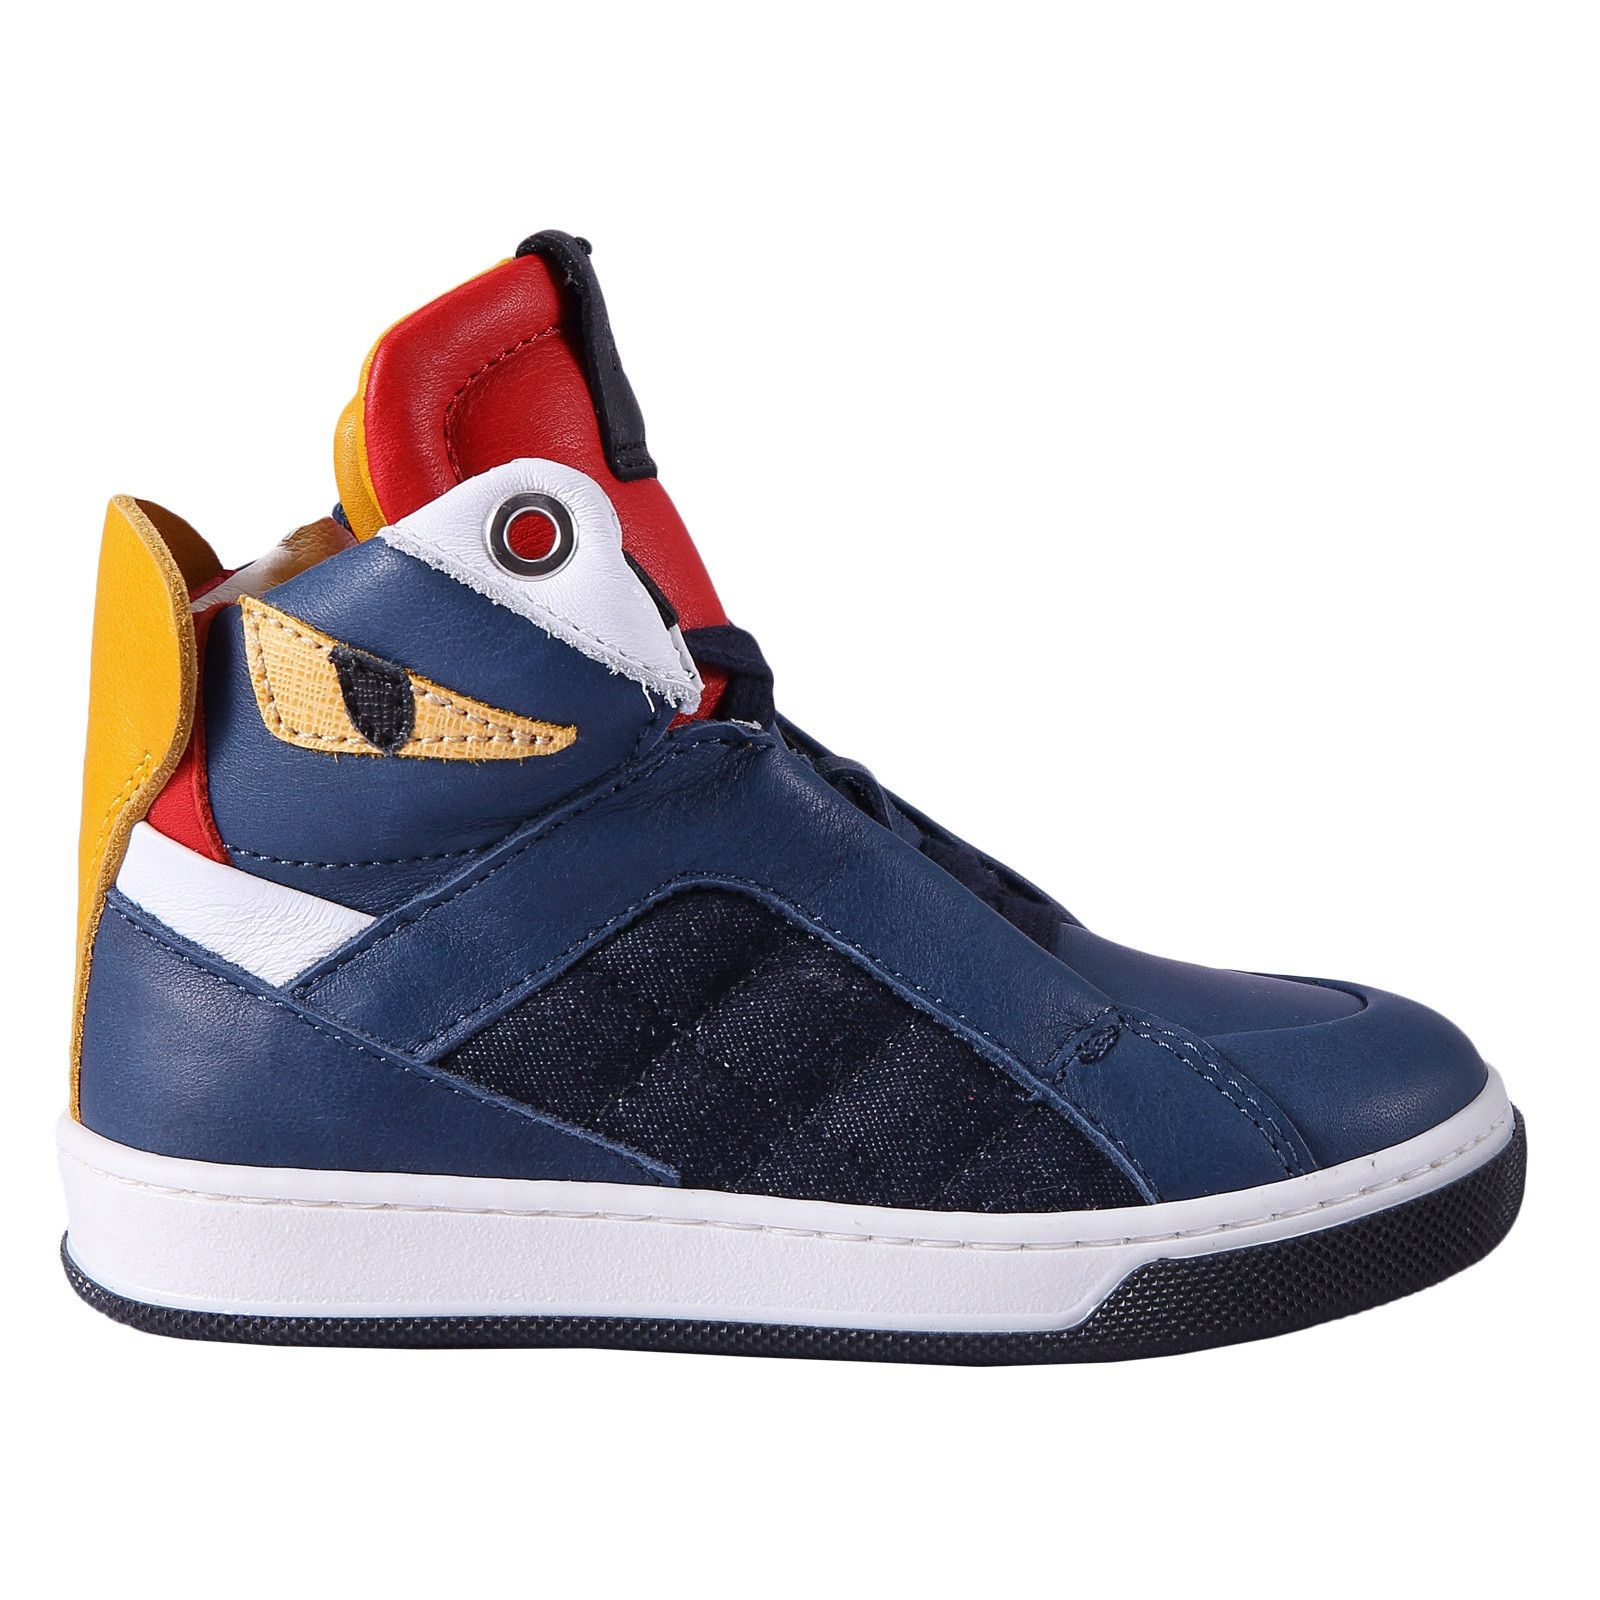 Boys Blue 'Monster' Leather High-Top Trainers - CÉMAROSE | Children's Fashion Store - 1